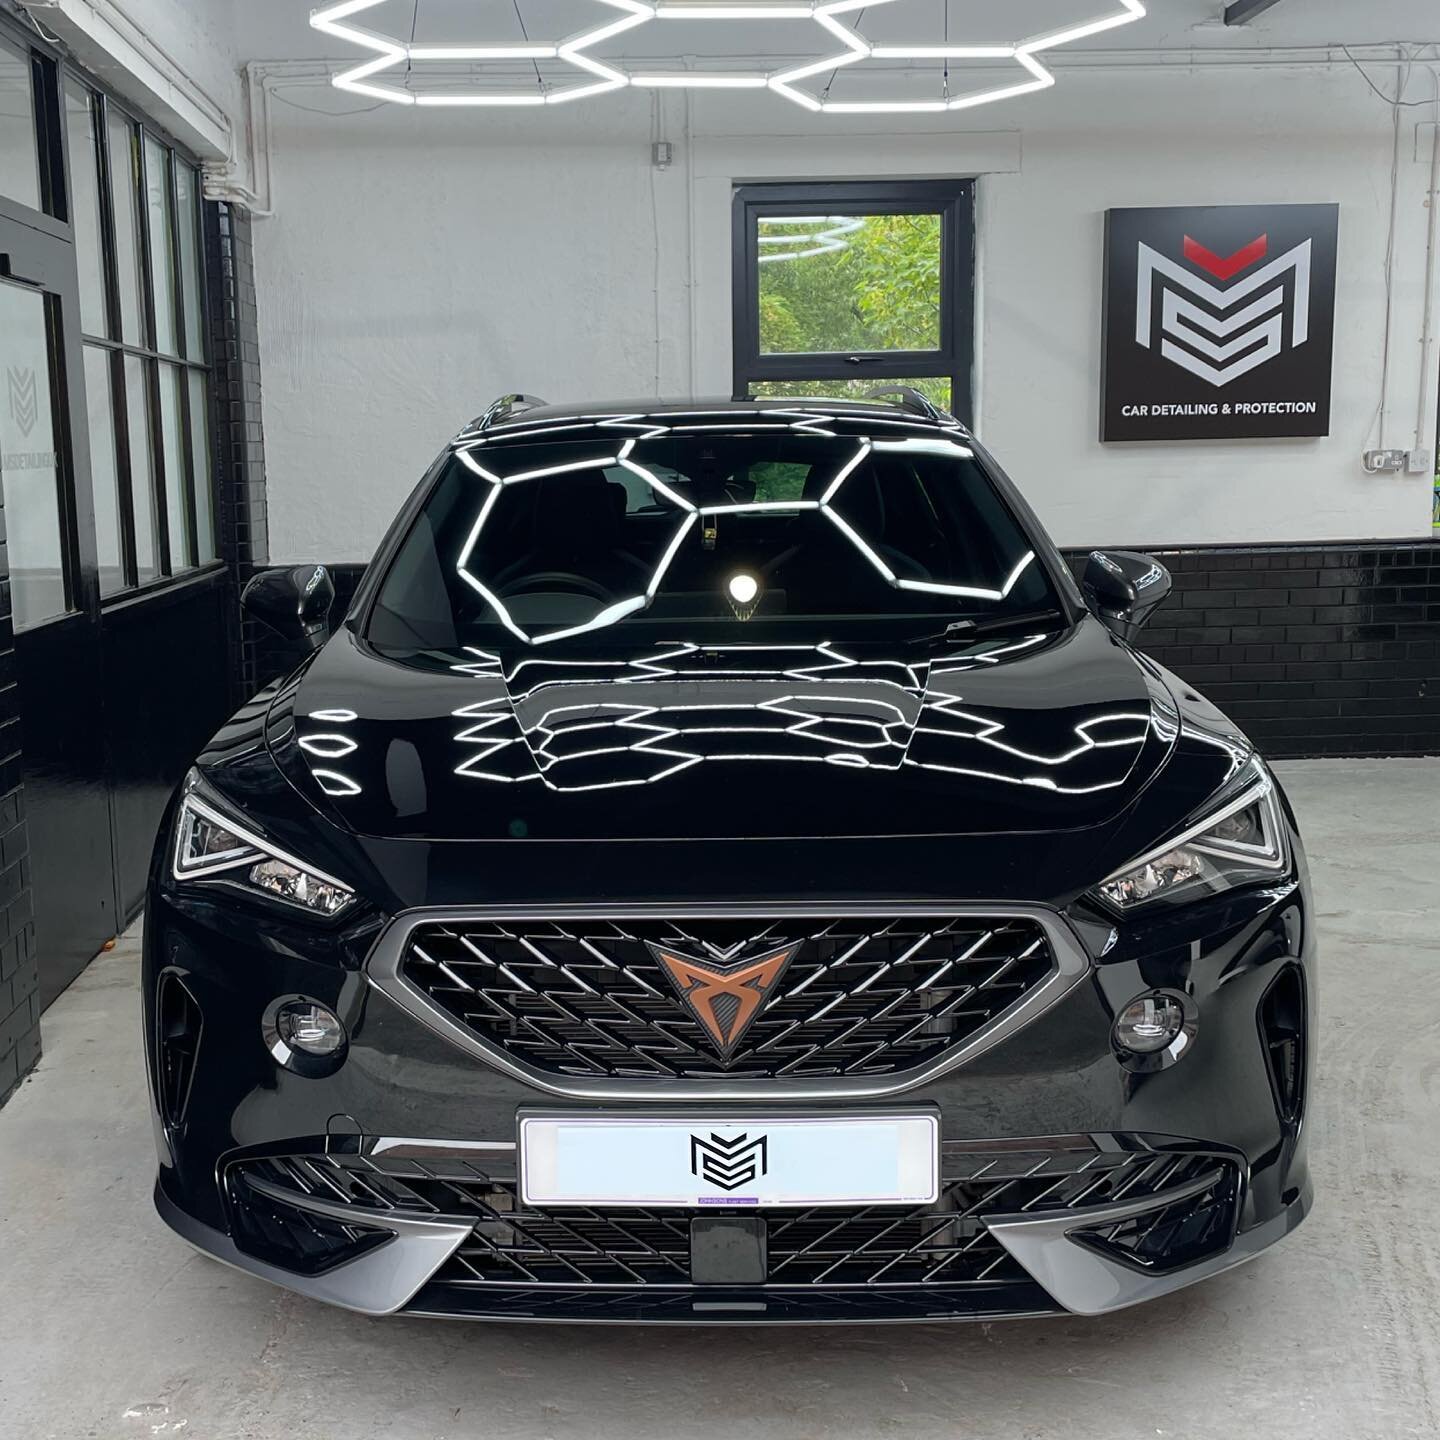 ✨MSDETAILINGUK✨
Cupra💥 in for our maintenance detail!!! 

EXTERIOR 
* PRE WASHED (BREAKING DOWN BUILT UP DIRT)
* SNOWFOAM PLUS 2 BUCKED METHOD (WE WASH THE SAFE WAY)
* ALLOYS CLEANED IN DETAIL 
* TYRES GEL DRESSED 
* EXTERIOR GLASS CLEANED 
* DETAIL